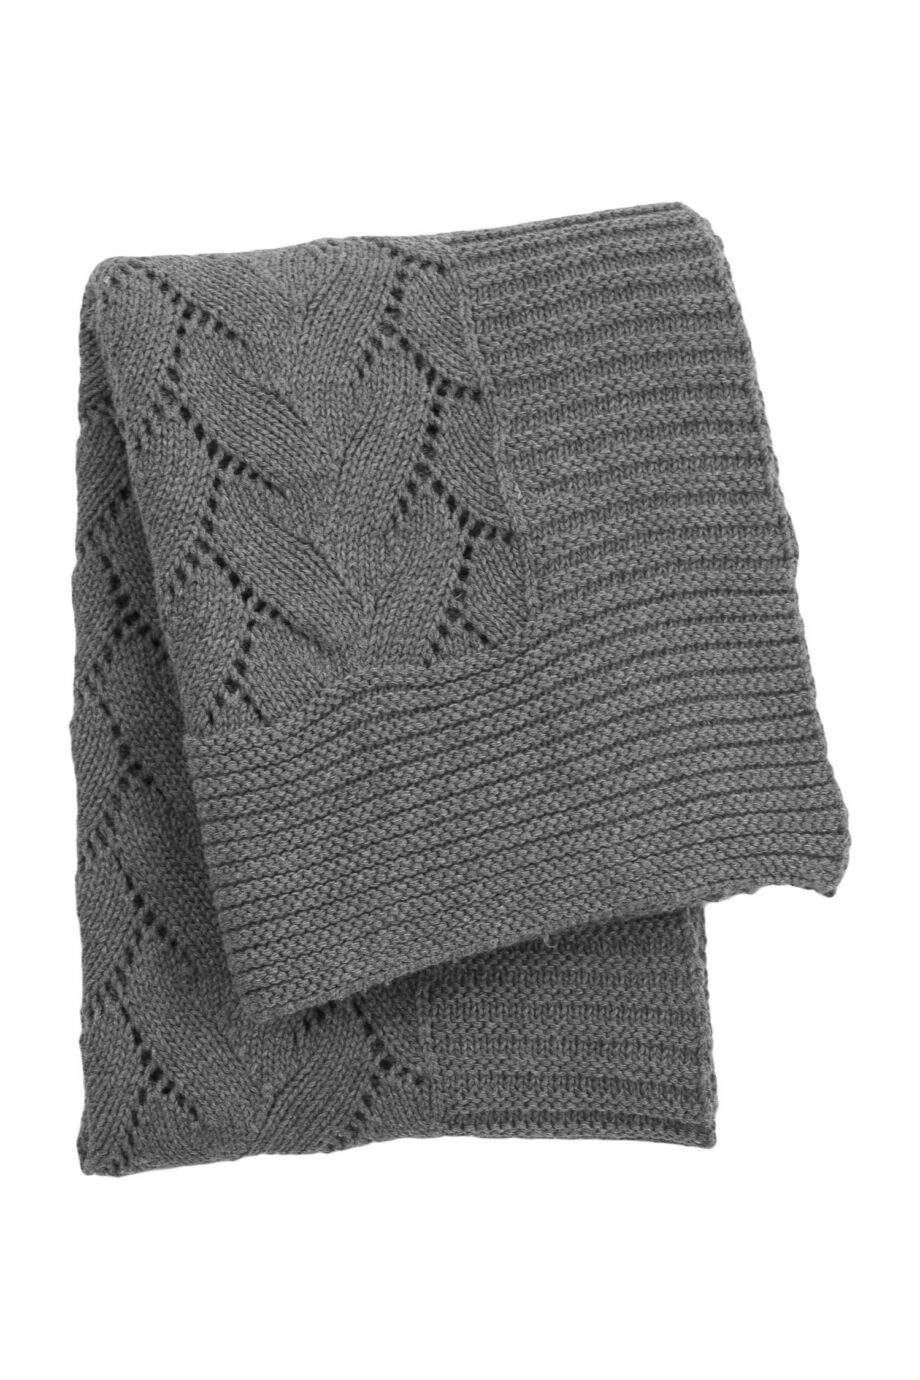 ajoure grey knitted cotton little blanket small